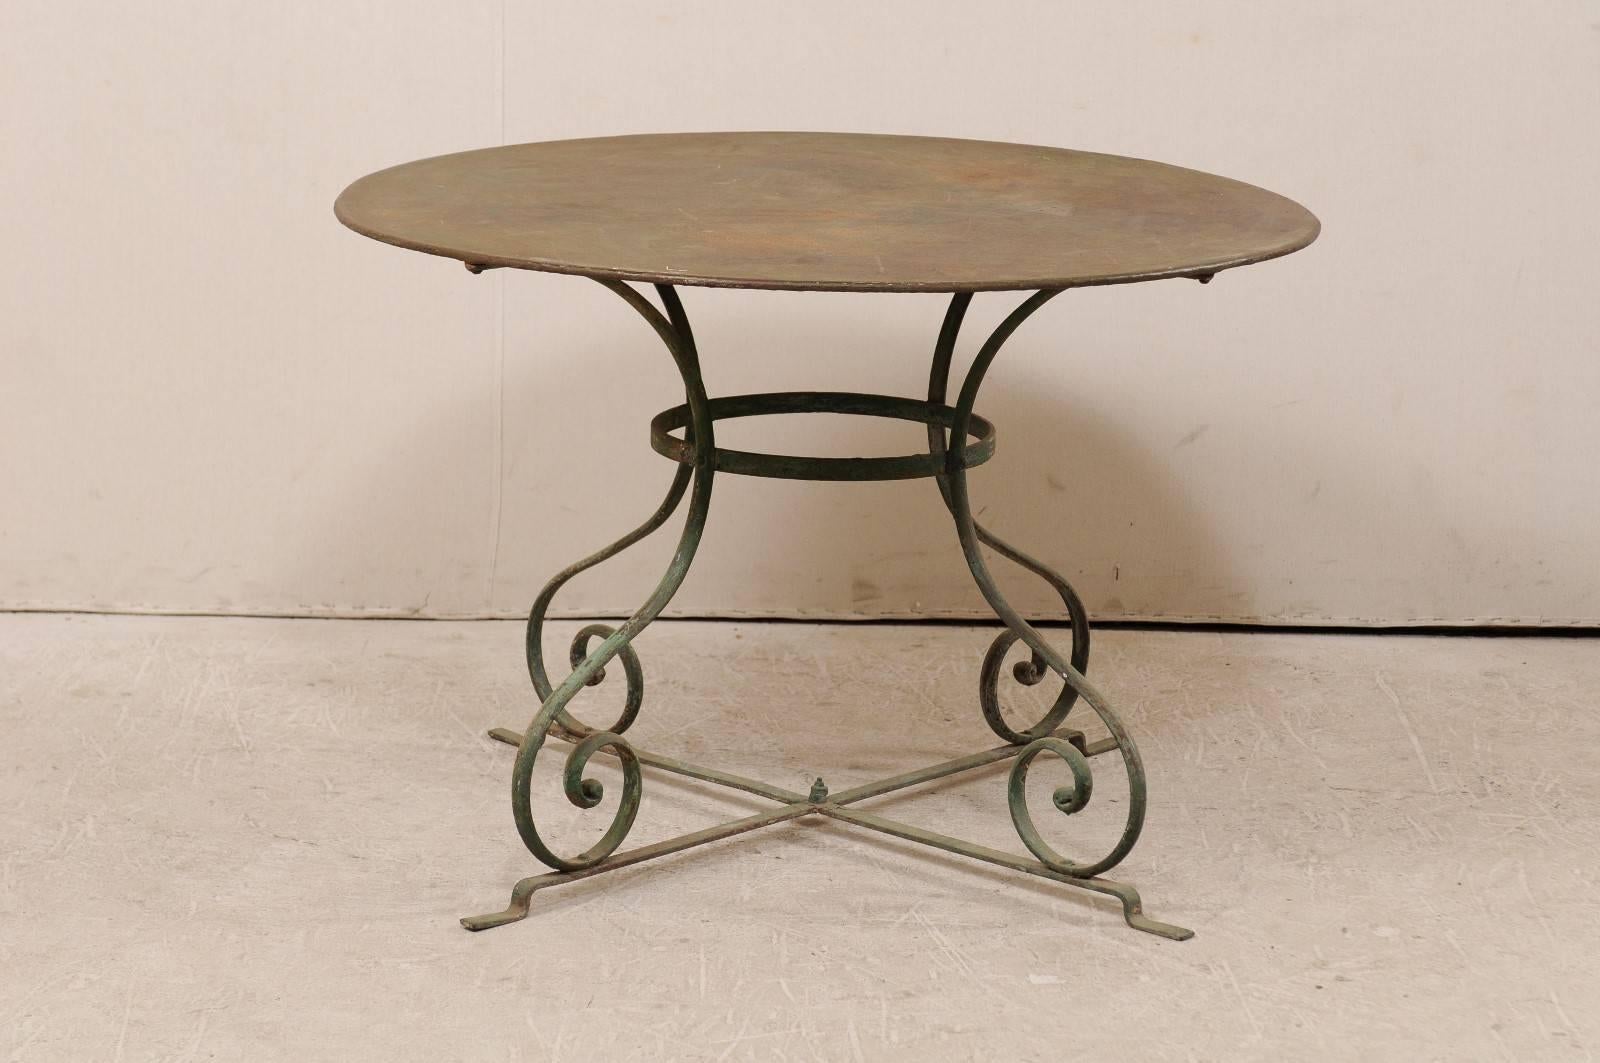 A French mid-20th century patio dining table. This round shaped metal patio table has a wonderfully aged patina and features a round top over four scrolling legs. Each of the four legs are connected to a circular center and bottom cross bar for